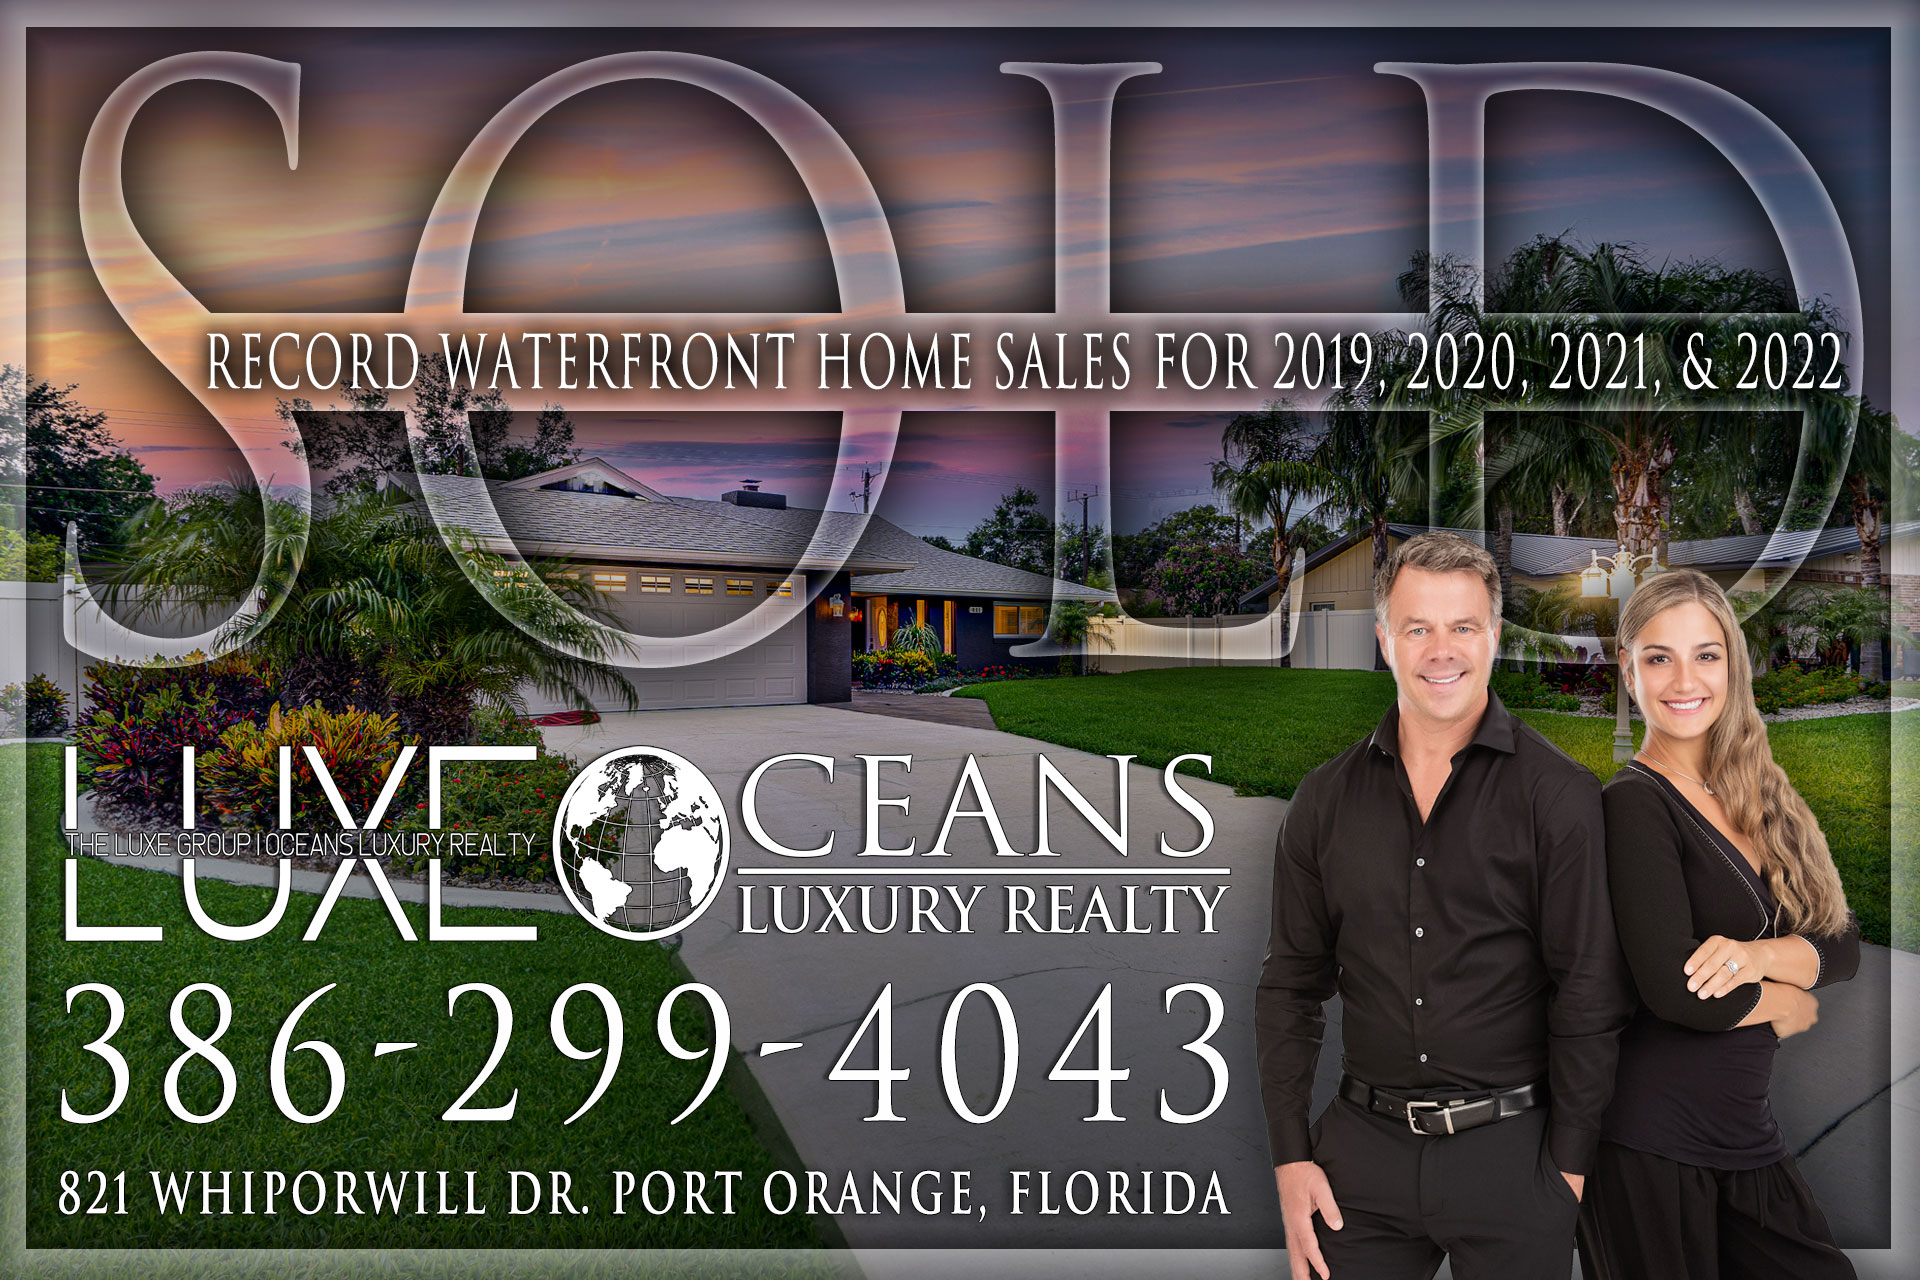 Port Orange Pool Homes For Sale. Just SOLD 821 Whiporwill Drive in Port Orange Florida - The LUXE Group at Oceans Luxury Realty 386-299-4043